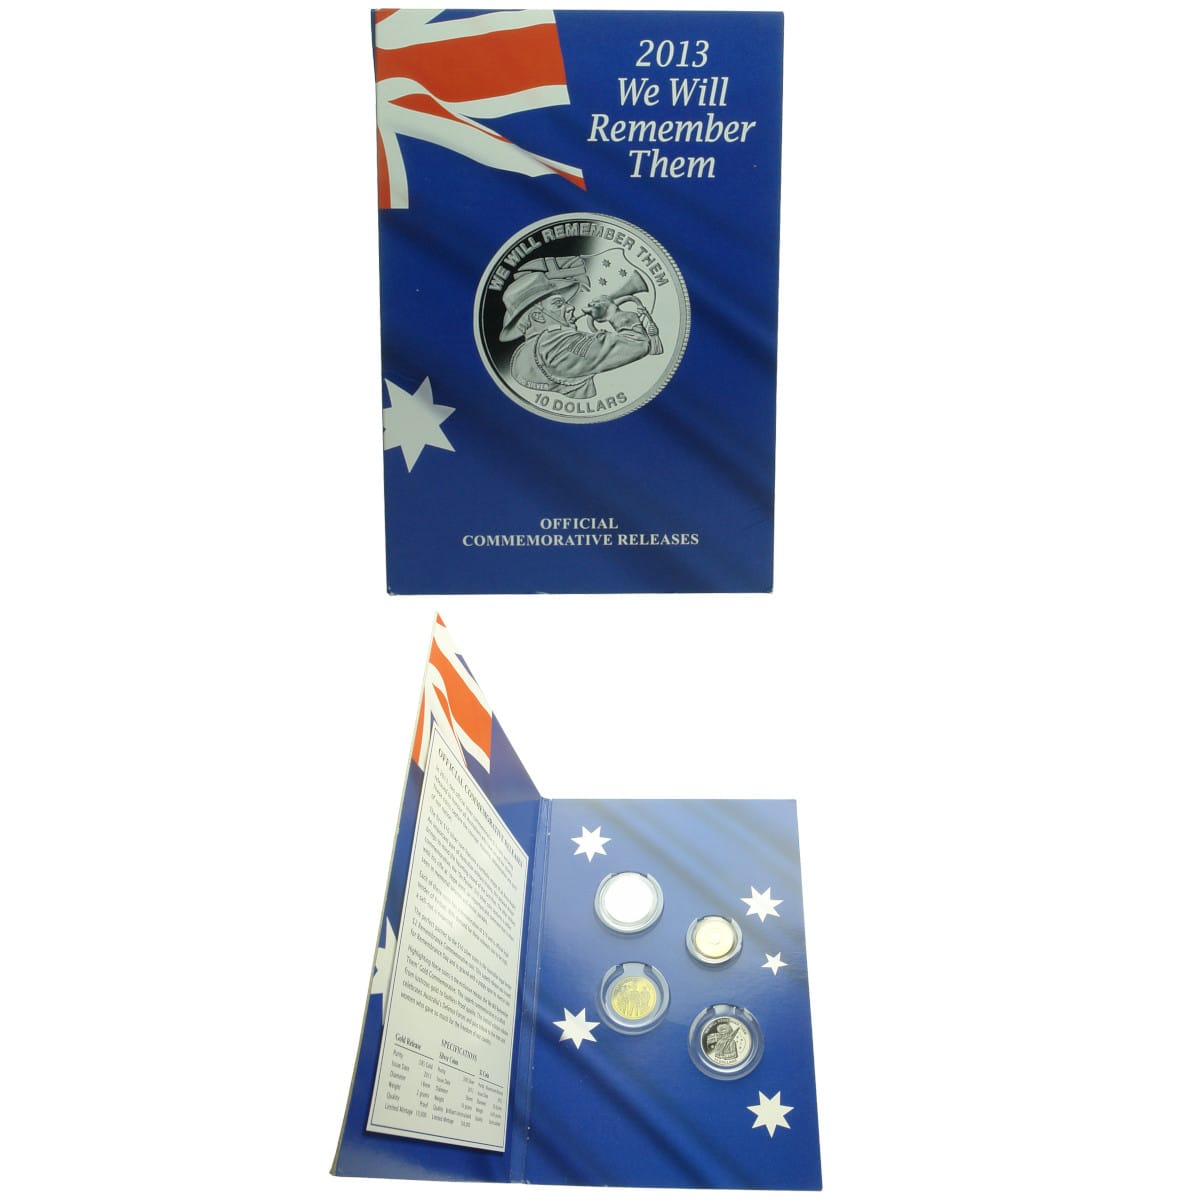 Coins. 2013 We Will Remember Them Commemorative Release, $10 'Army Bugler' Silver Coin and $2 Remembrance Commemorative Coin.